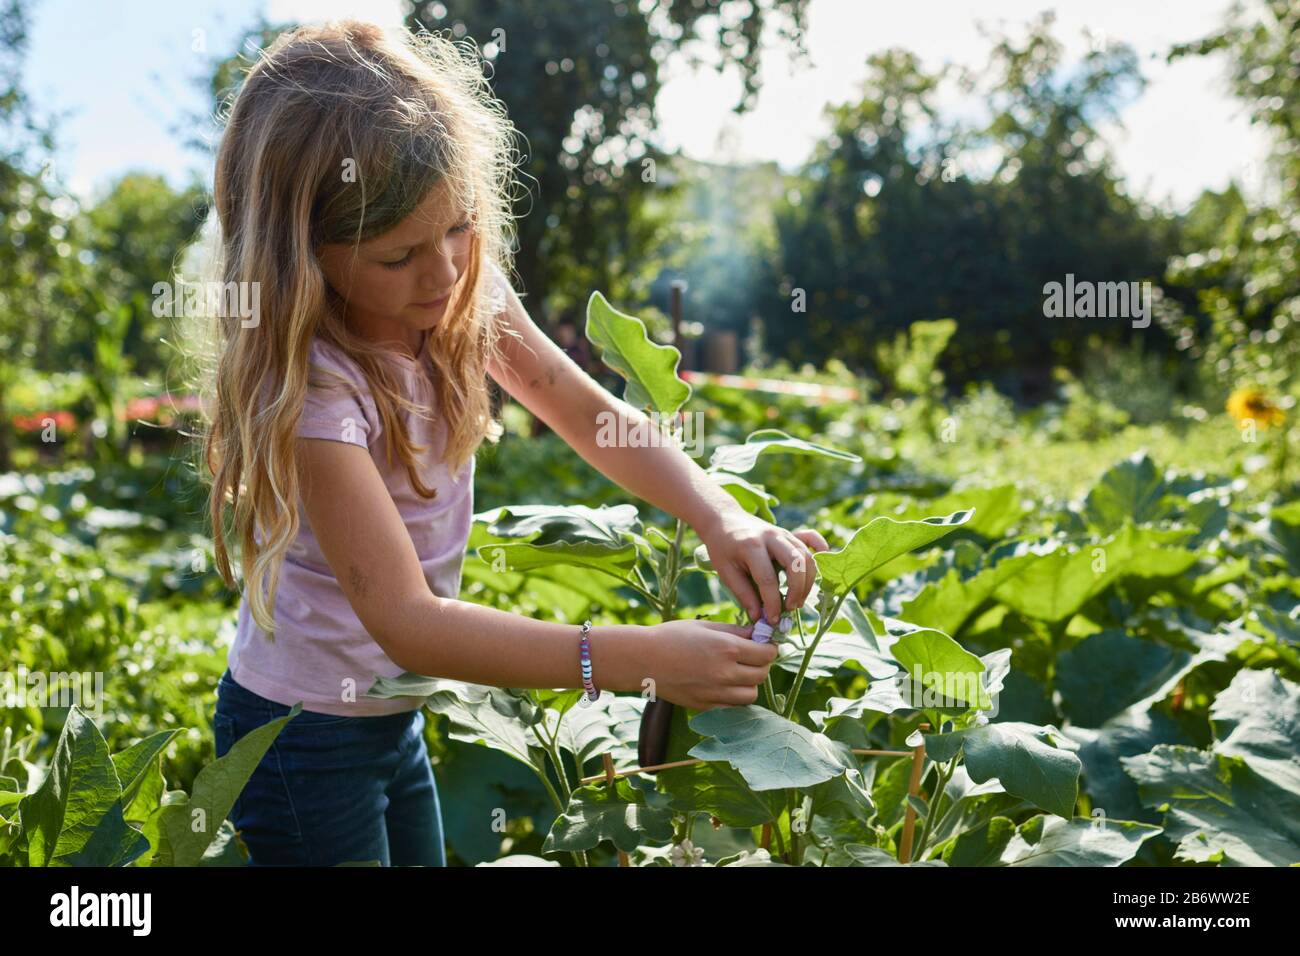 Children investigating food. A girl picks eggplants to make chips. Learning according to the Reggio Pedagogy principle, playful understanding and discovery. Germany. Stock Photo